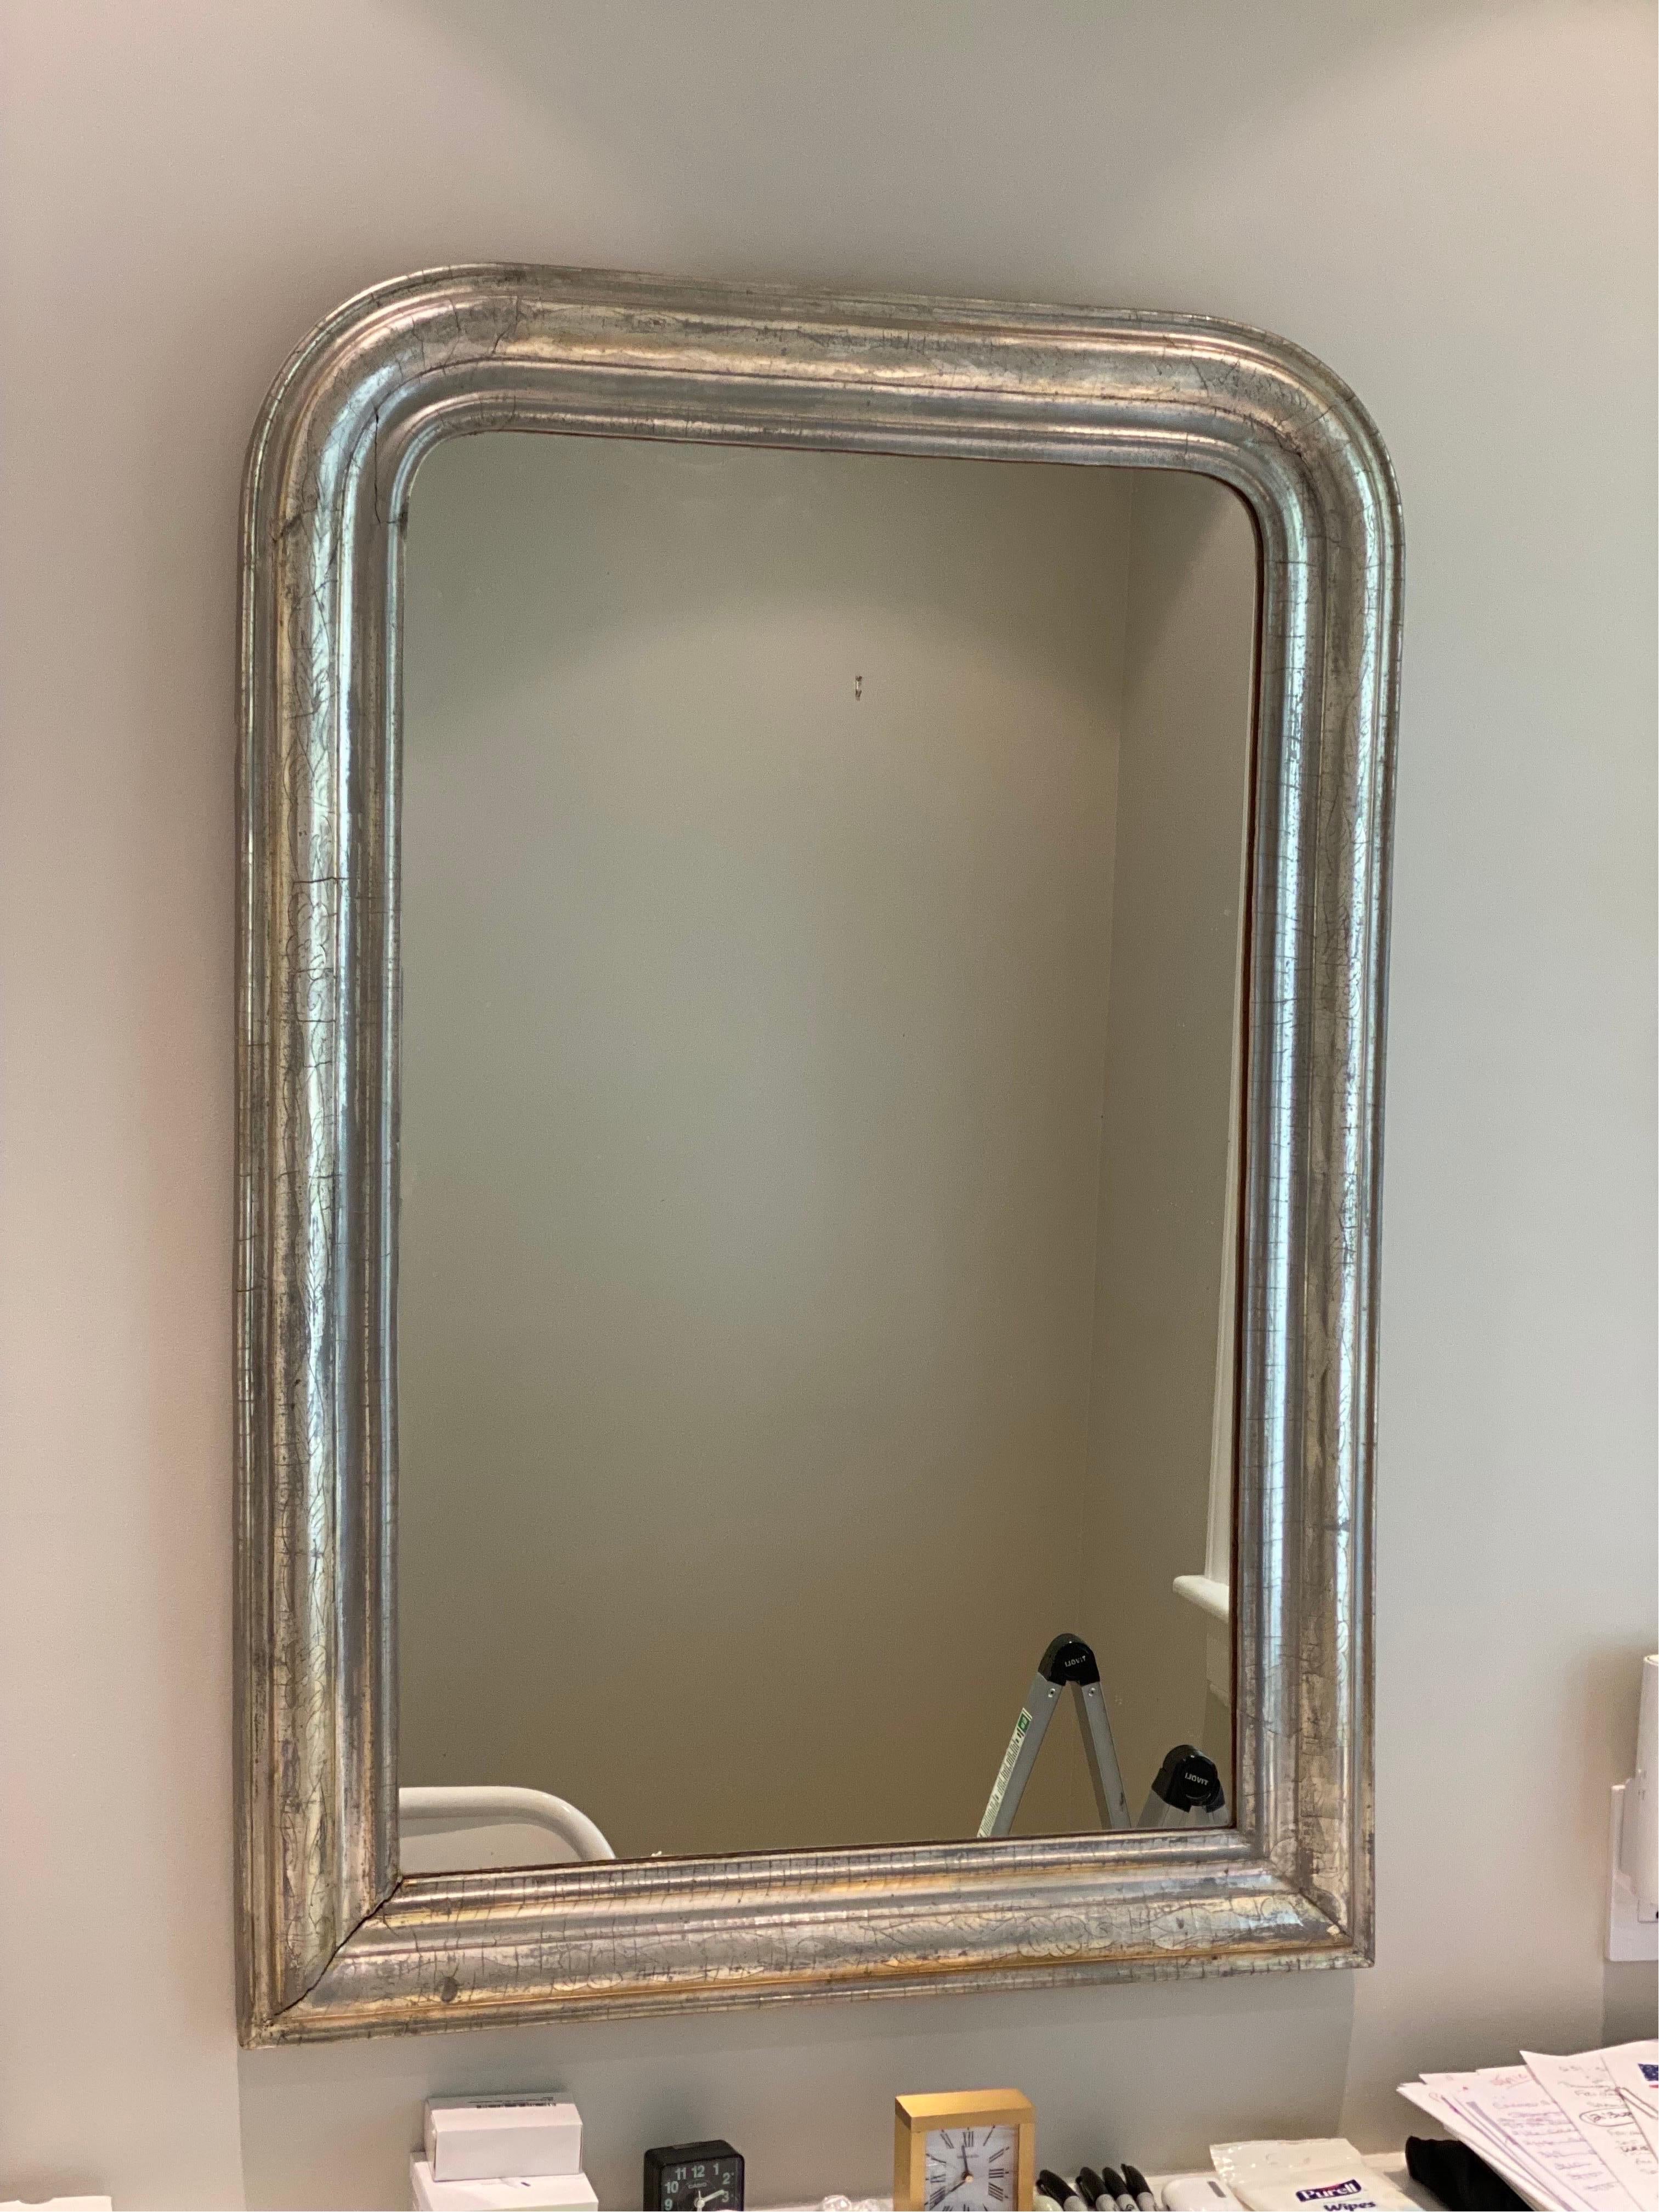 19th Century French Louis Philippe Silver Gilt mirror
Carved wood frame in a lovely silver gilt finish. Good overall condition. Some light wear and chips in some spots. Vibrant finish.

29.25